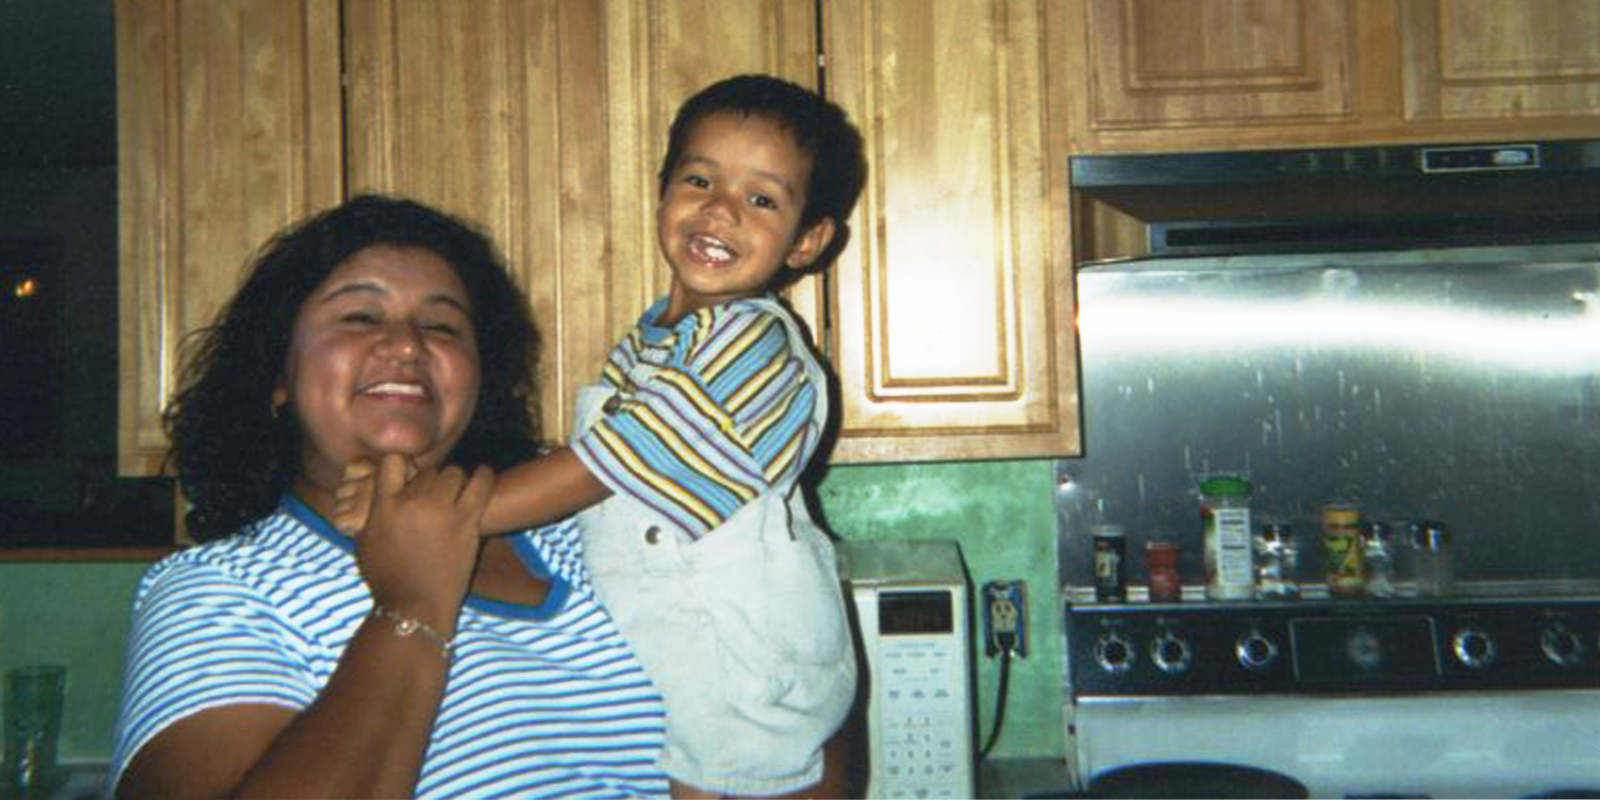 Melissa with Randy (approx 3 years old) in her kitchen